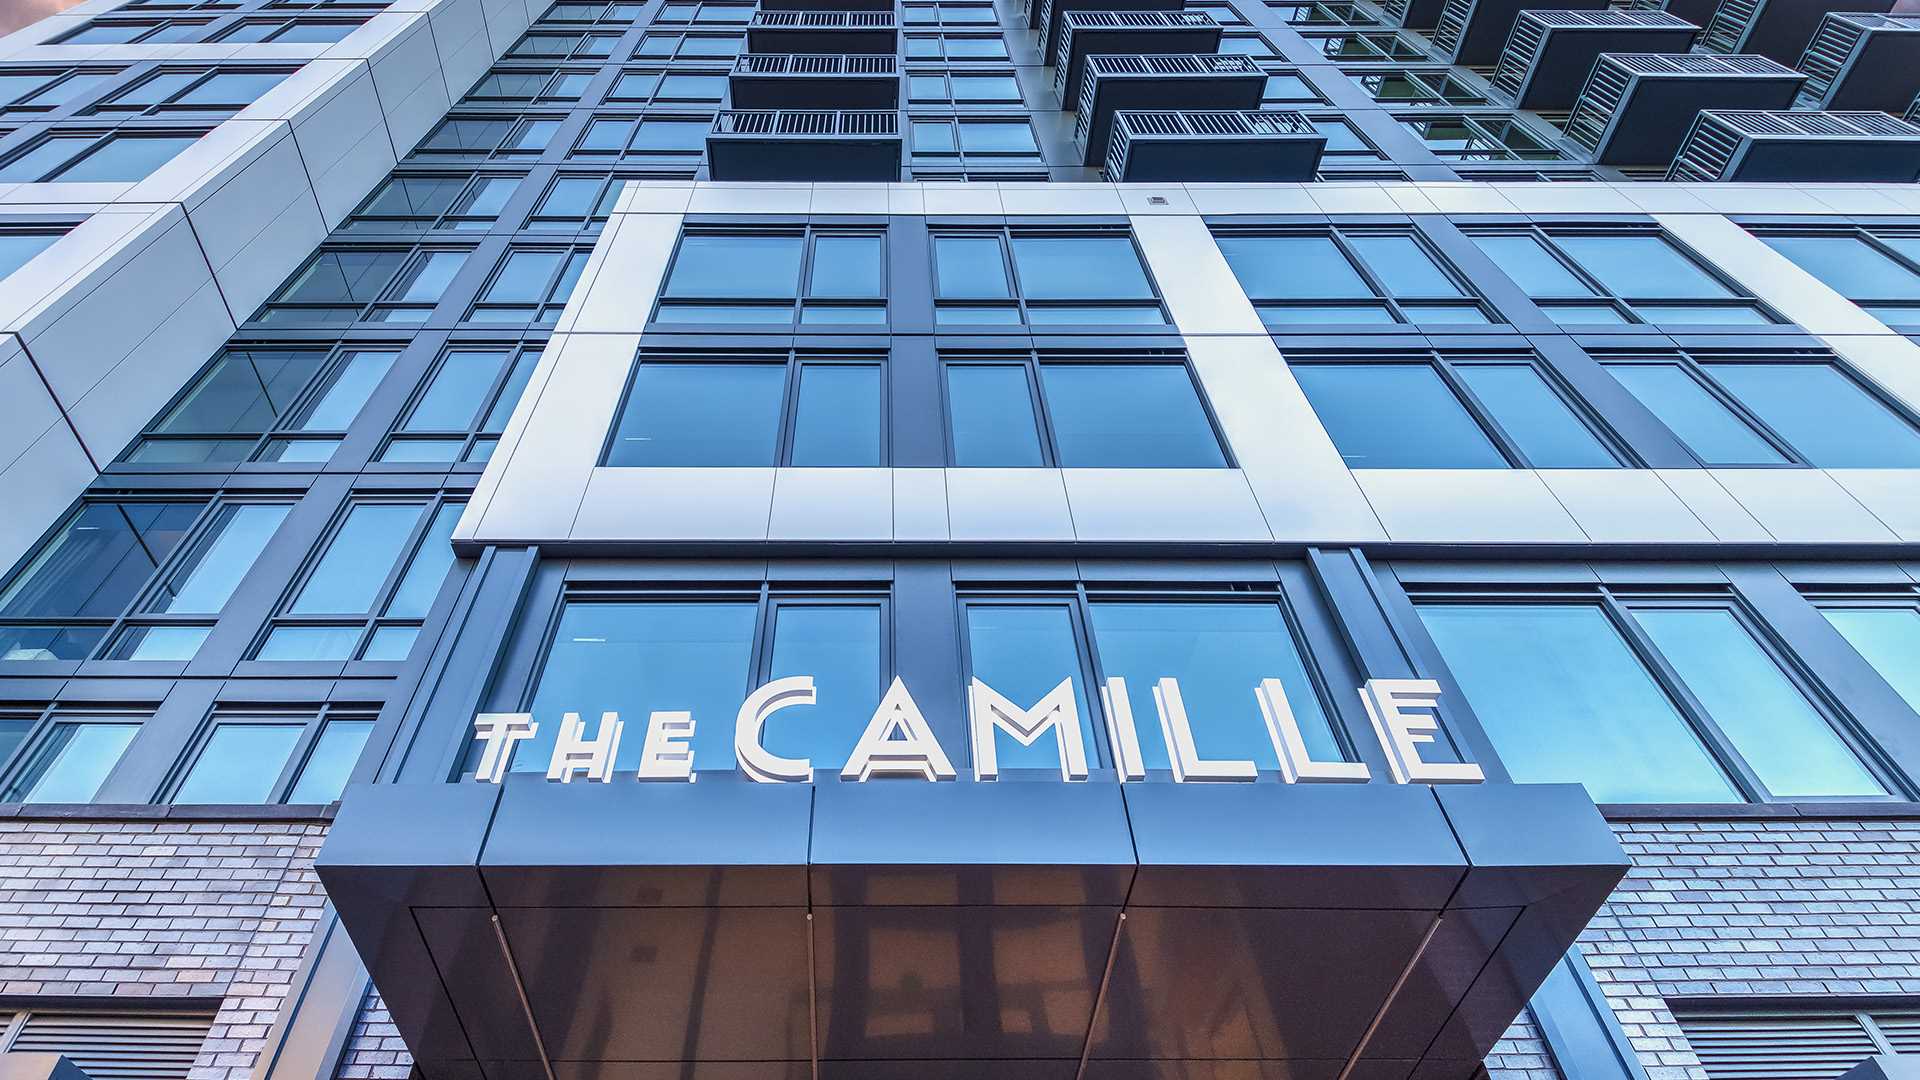 The Camille - apartments in Bethesda - exterior